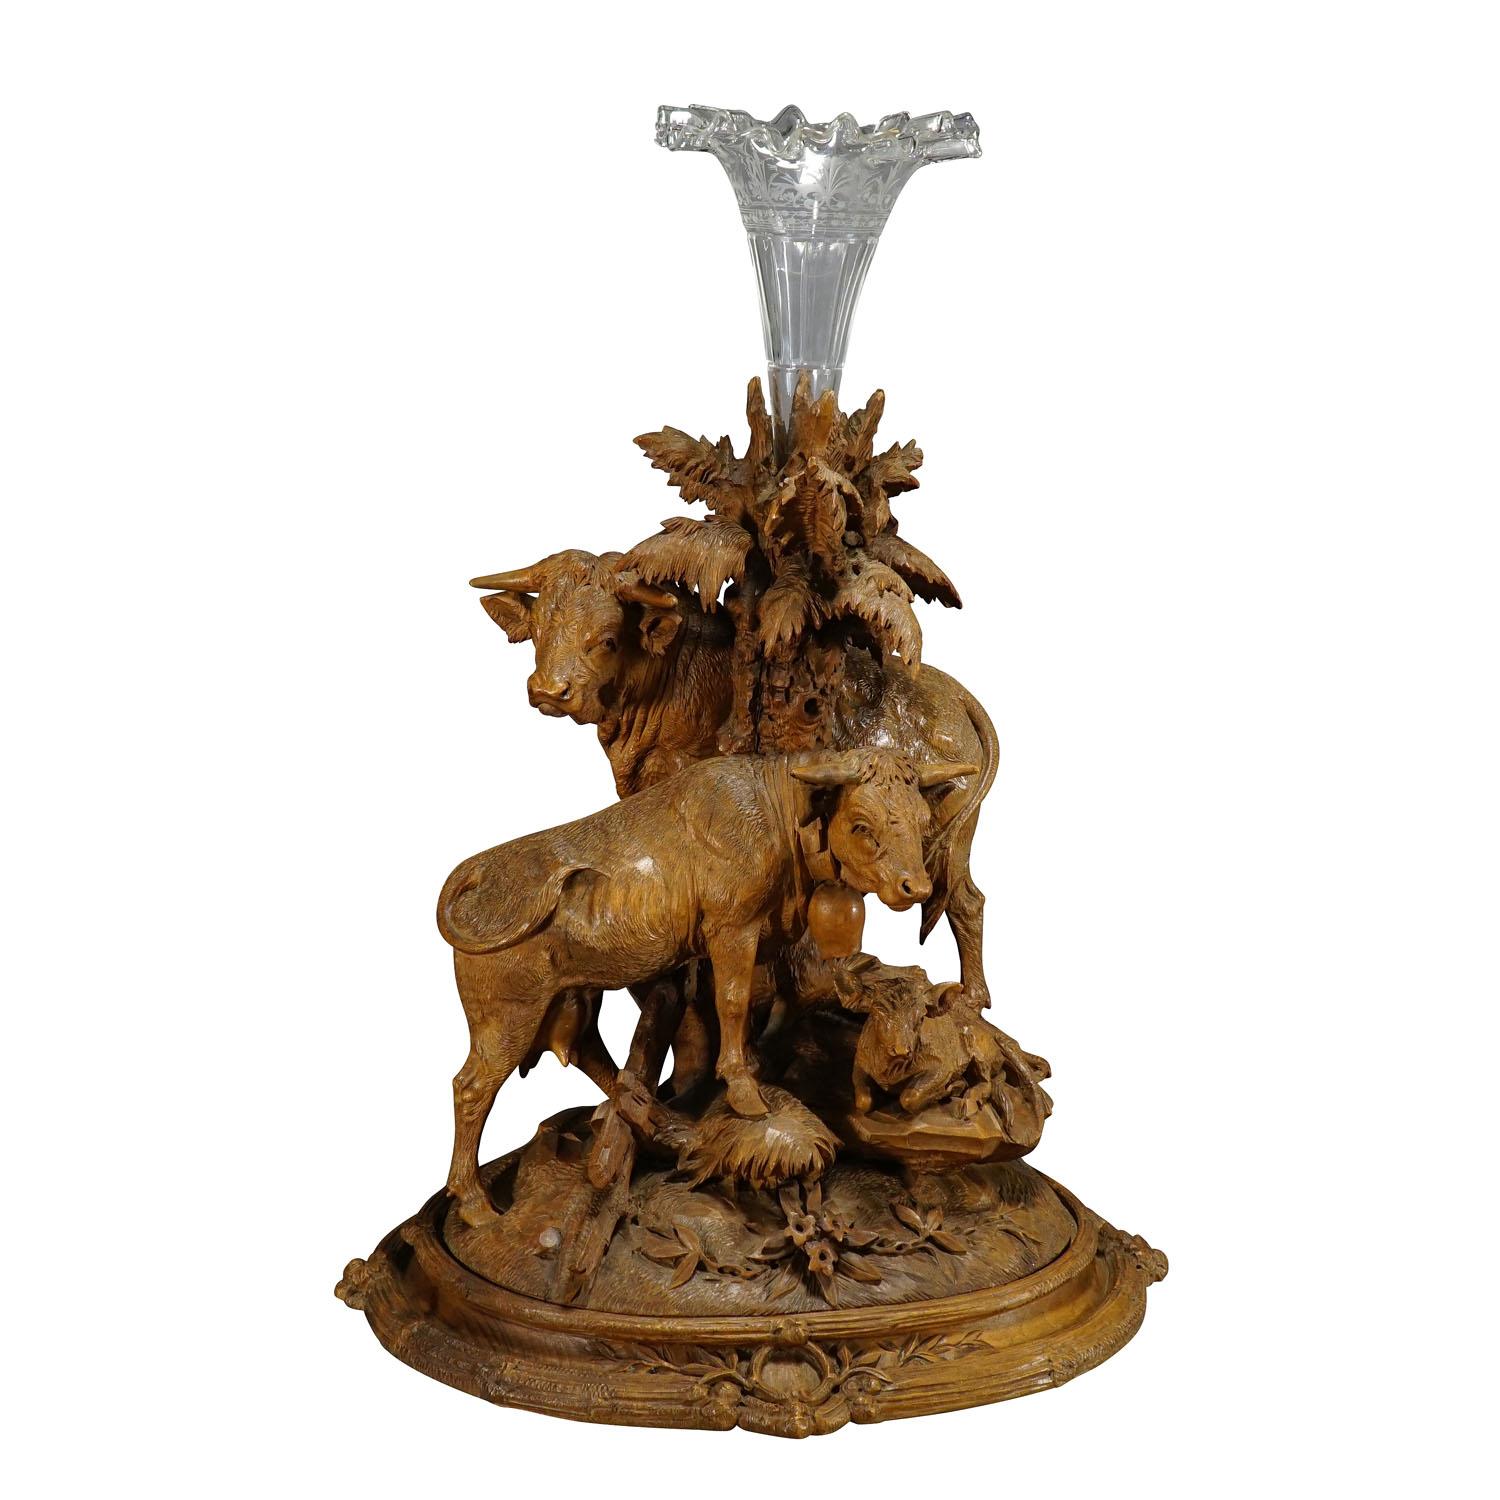 Large Group of Carved Cattles with Glass Vase Inset, Brienz ca. 1890

A rare group of naturalistically carved cattles - bull, female cattle and young cattle standing around a stump. Original glass vase inset in the stump. Height without glass: 17.7'